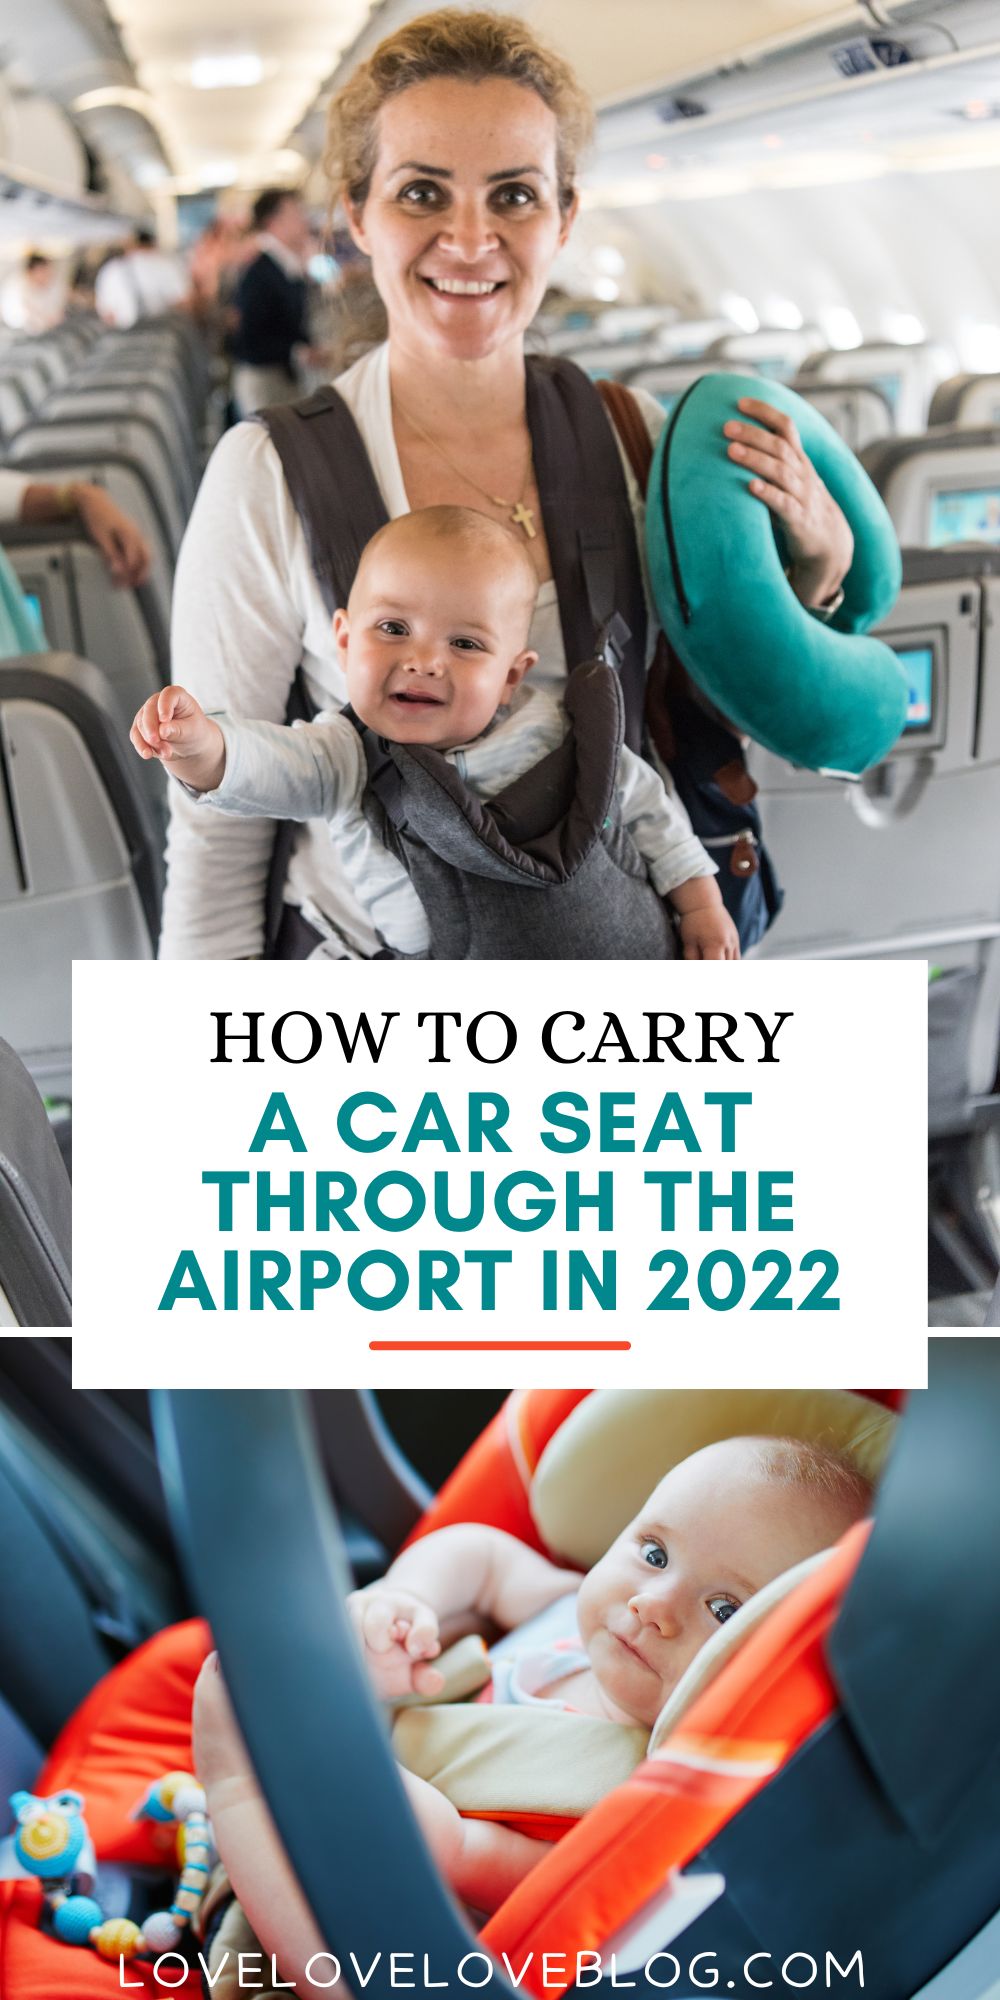 Pinterest graphic with text and image collage with a baby in a car seat and on an airplane.